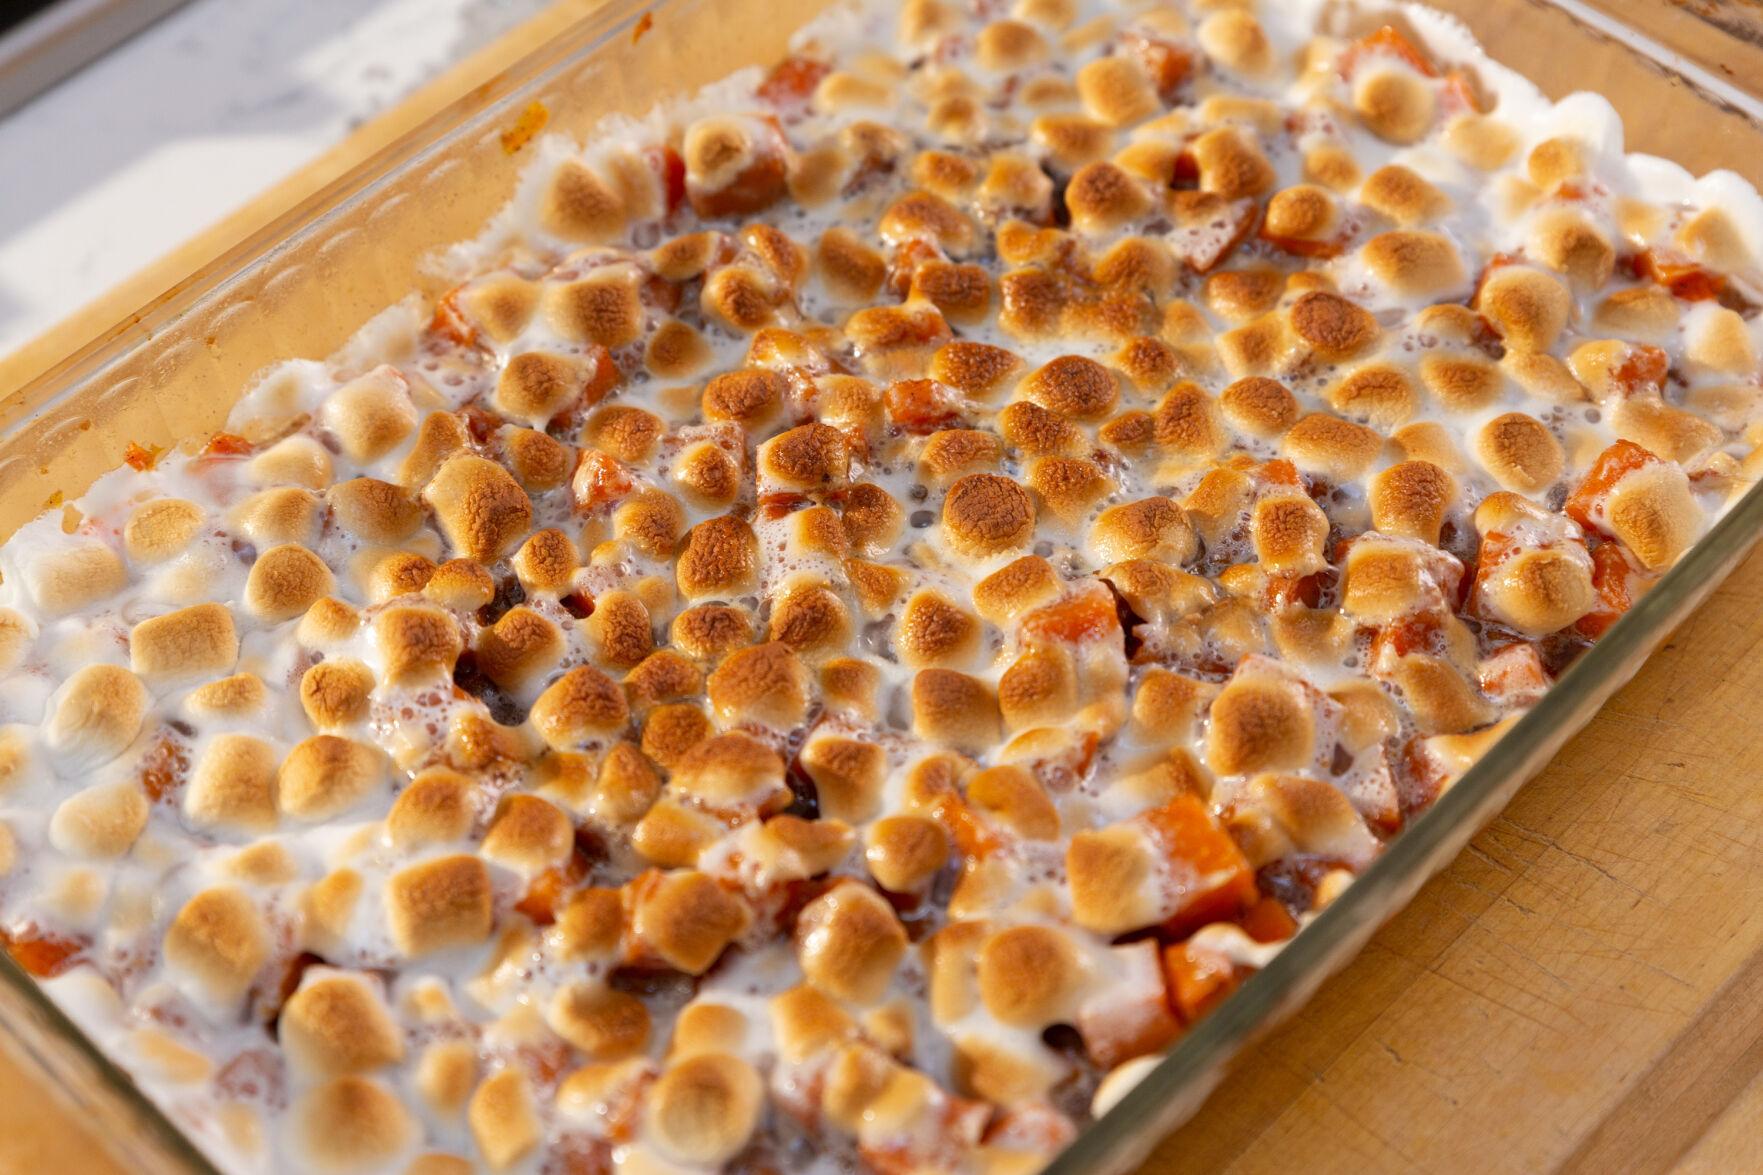 Everyone’s favorite seasonal side dish: Candied yams with marshmallows